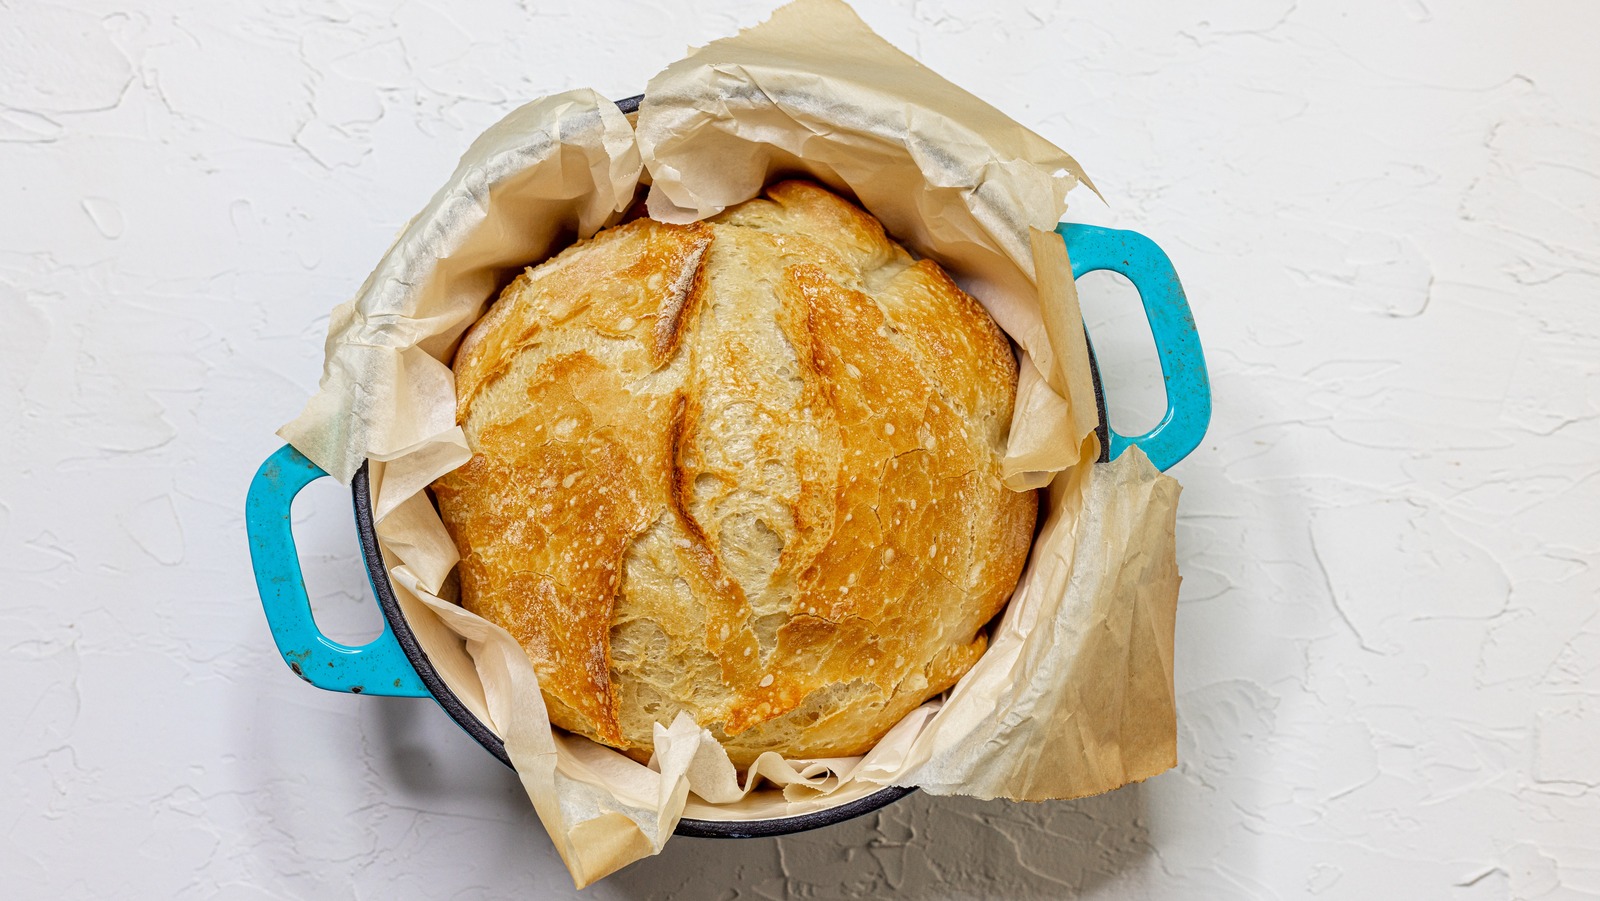 https://www.tastingtable.com/img/gallery/a-potential-downside-to-using-a-dutch-oven-for-baking-bread/l-intro-1673992897.jpg